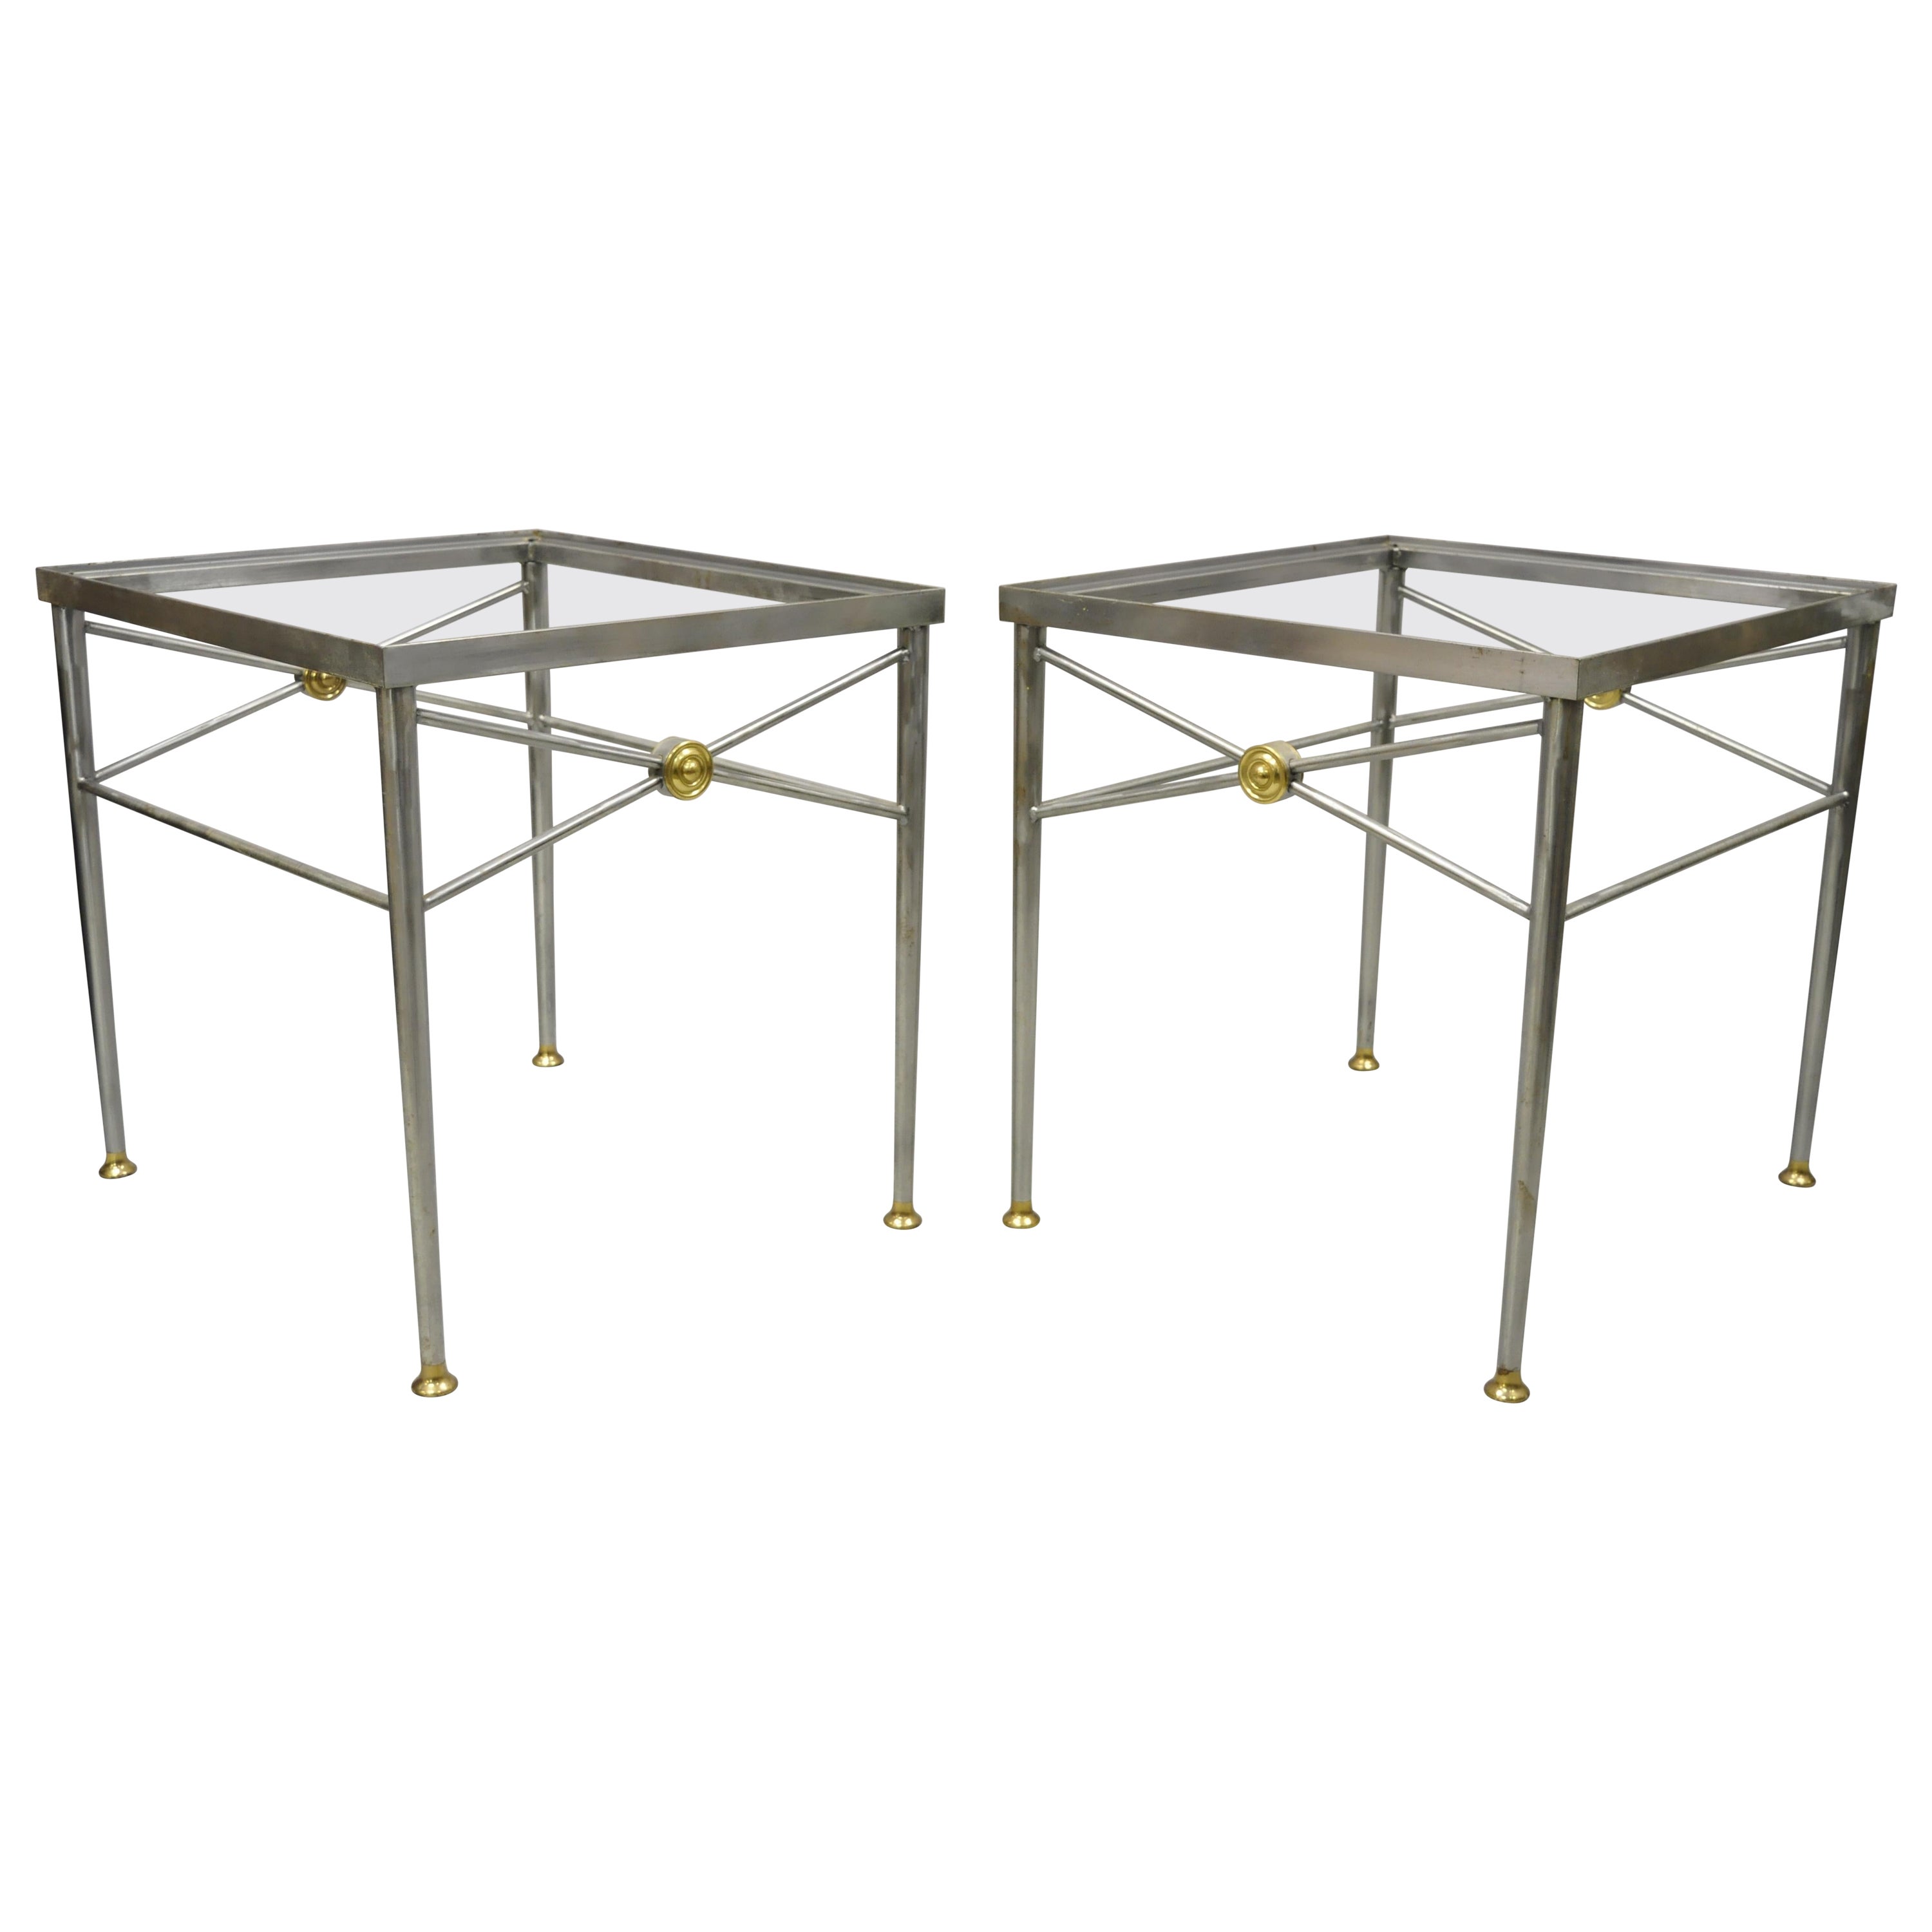 Italian Directoire Maison Jansen Style Brushed Steel & Brass End Tables, a Pair